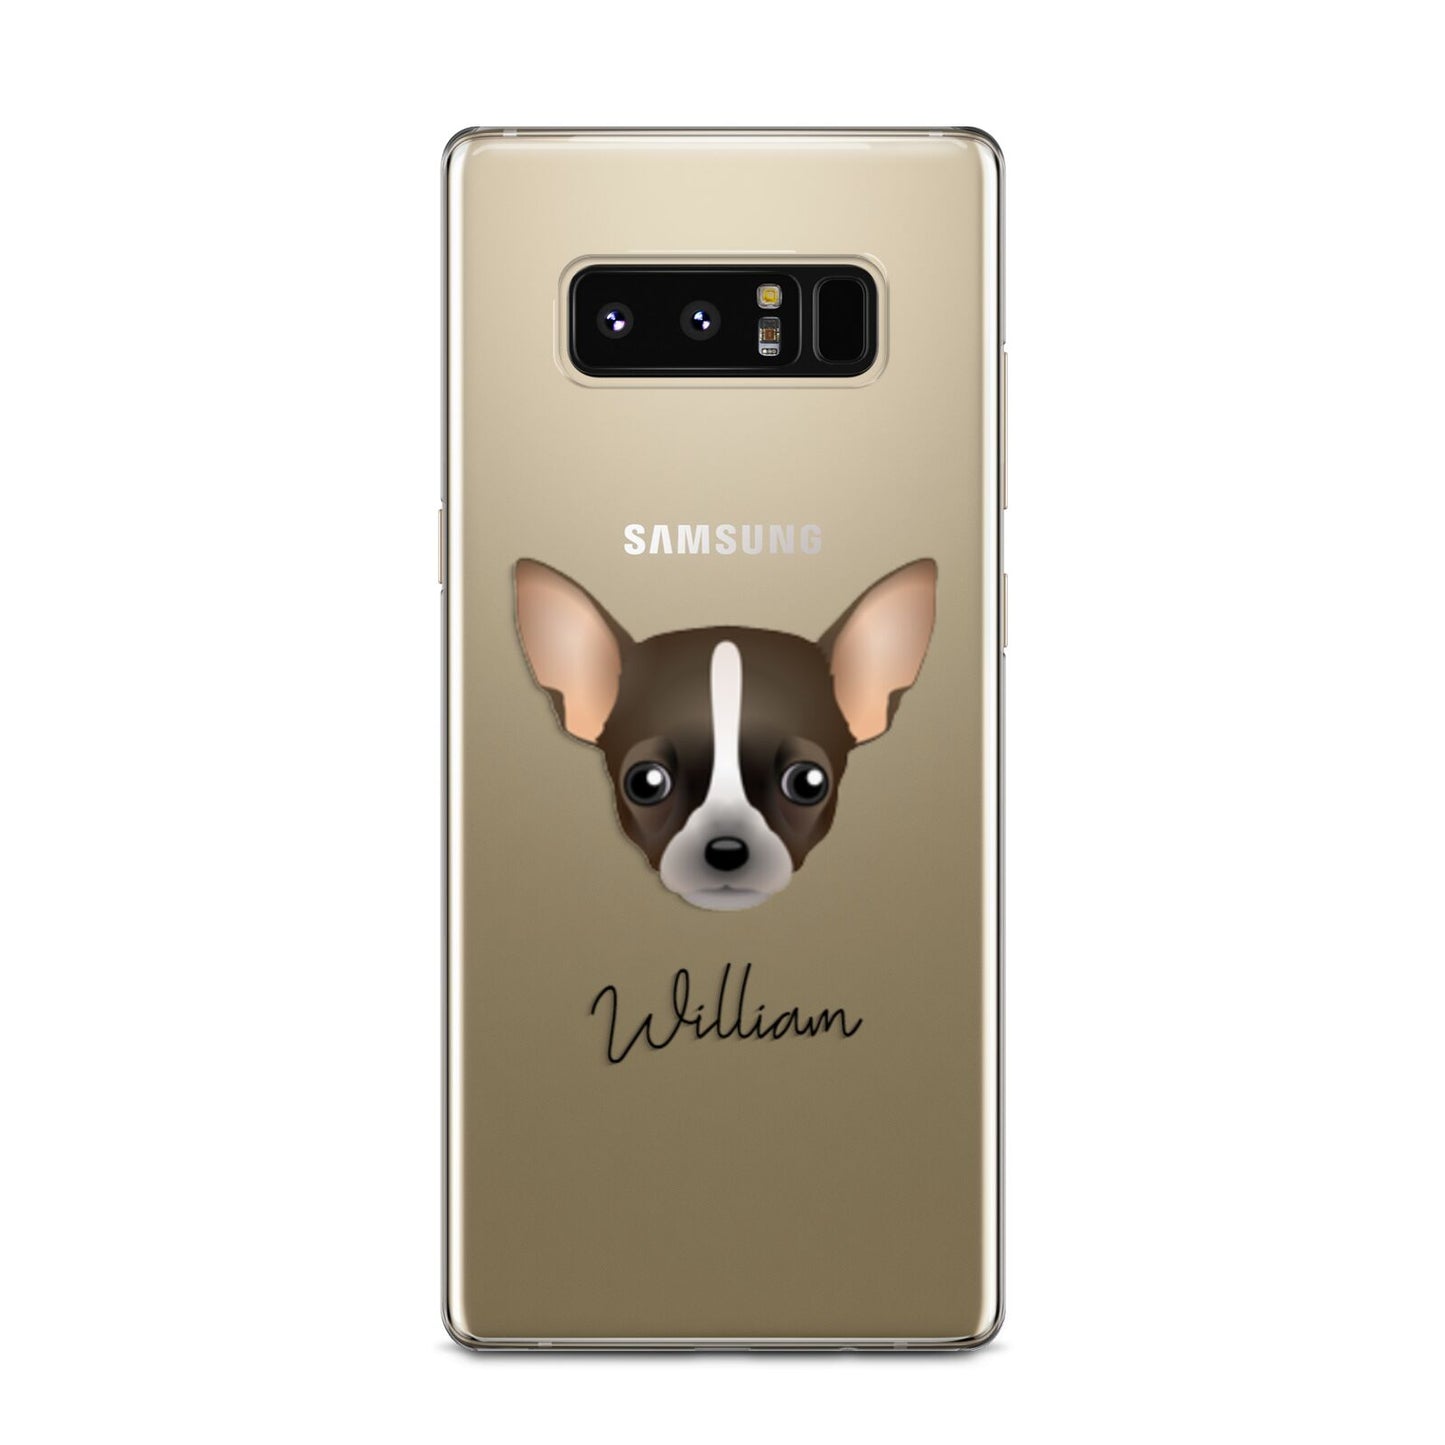 Chihuahua Personalised Samsung Galaxy Note 8 Case